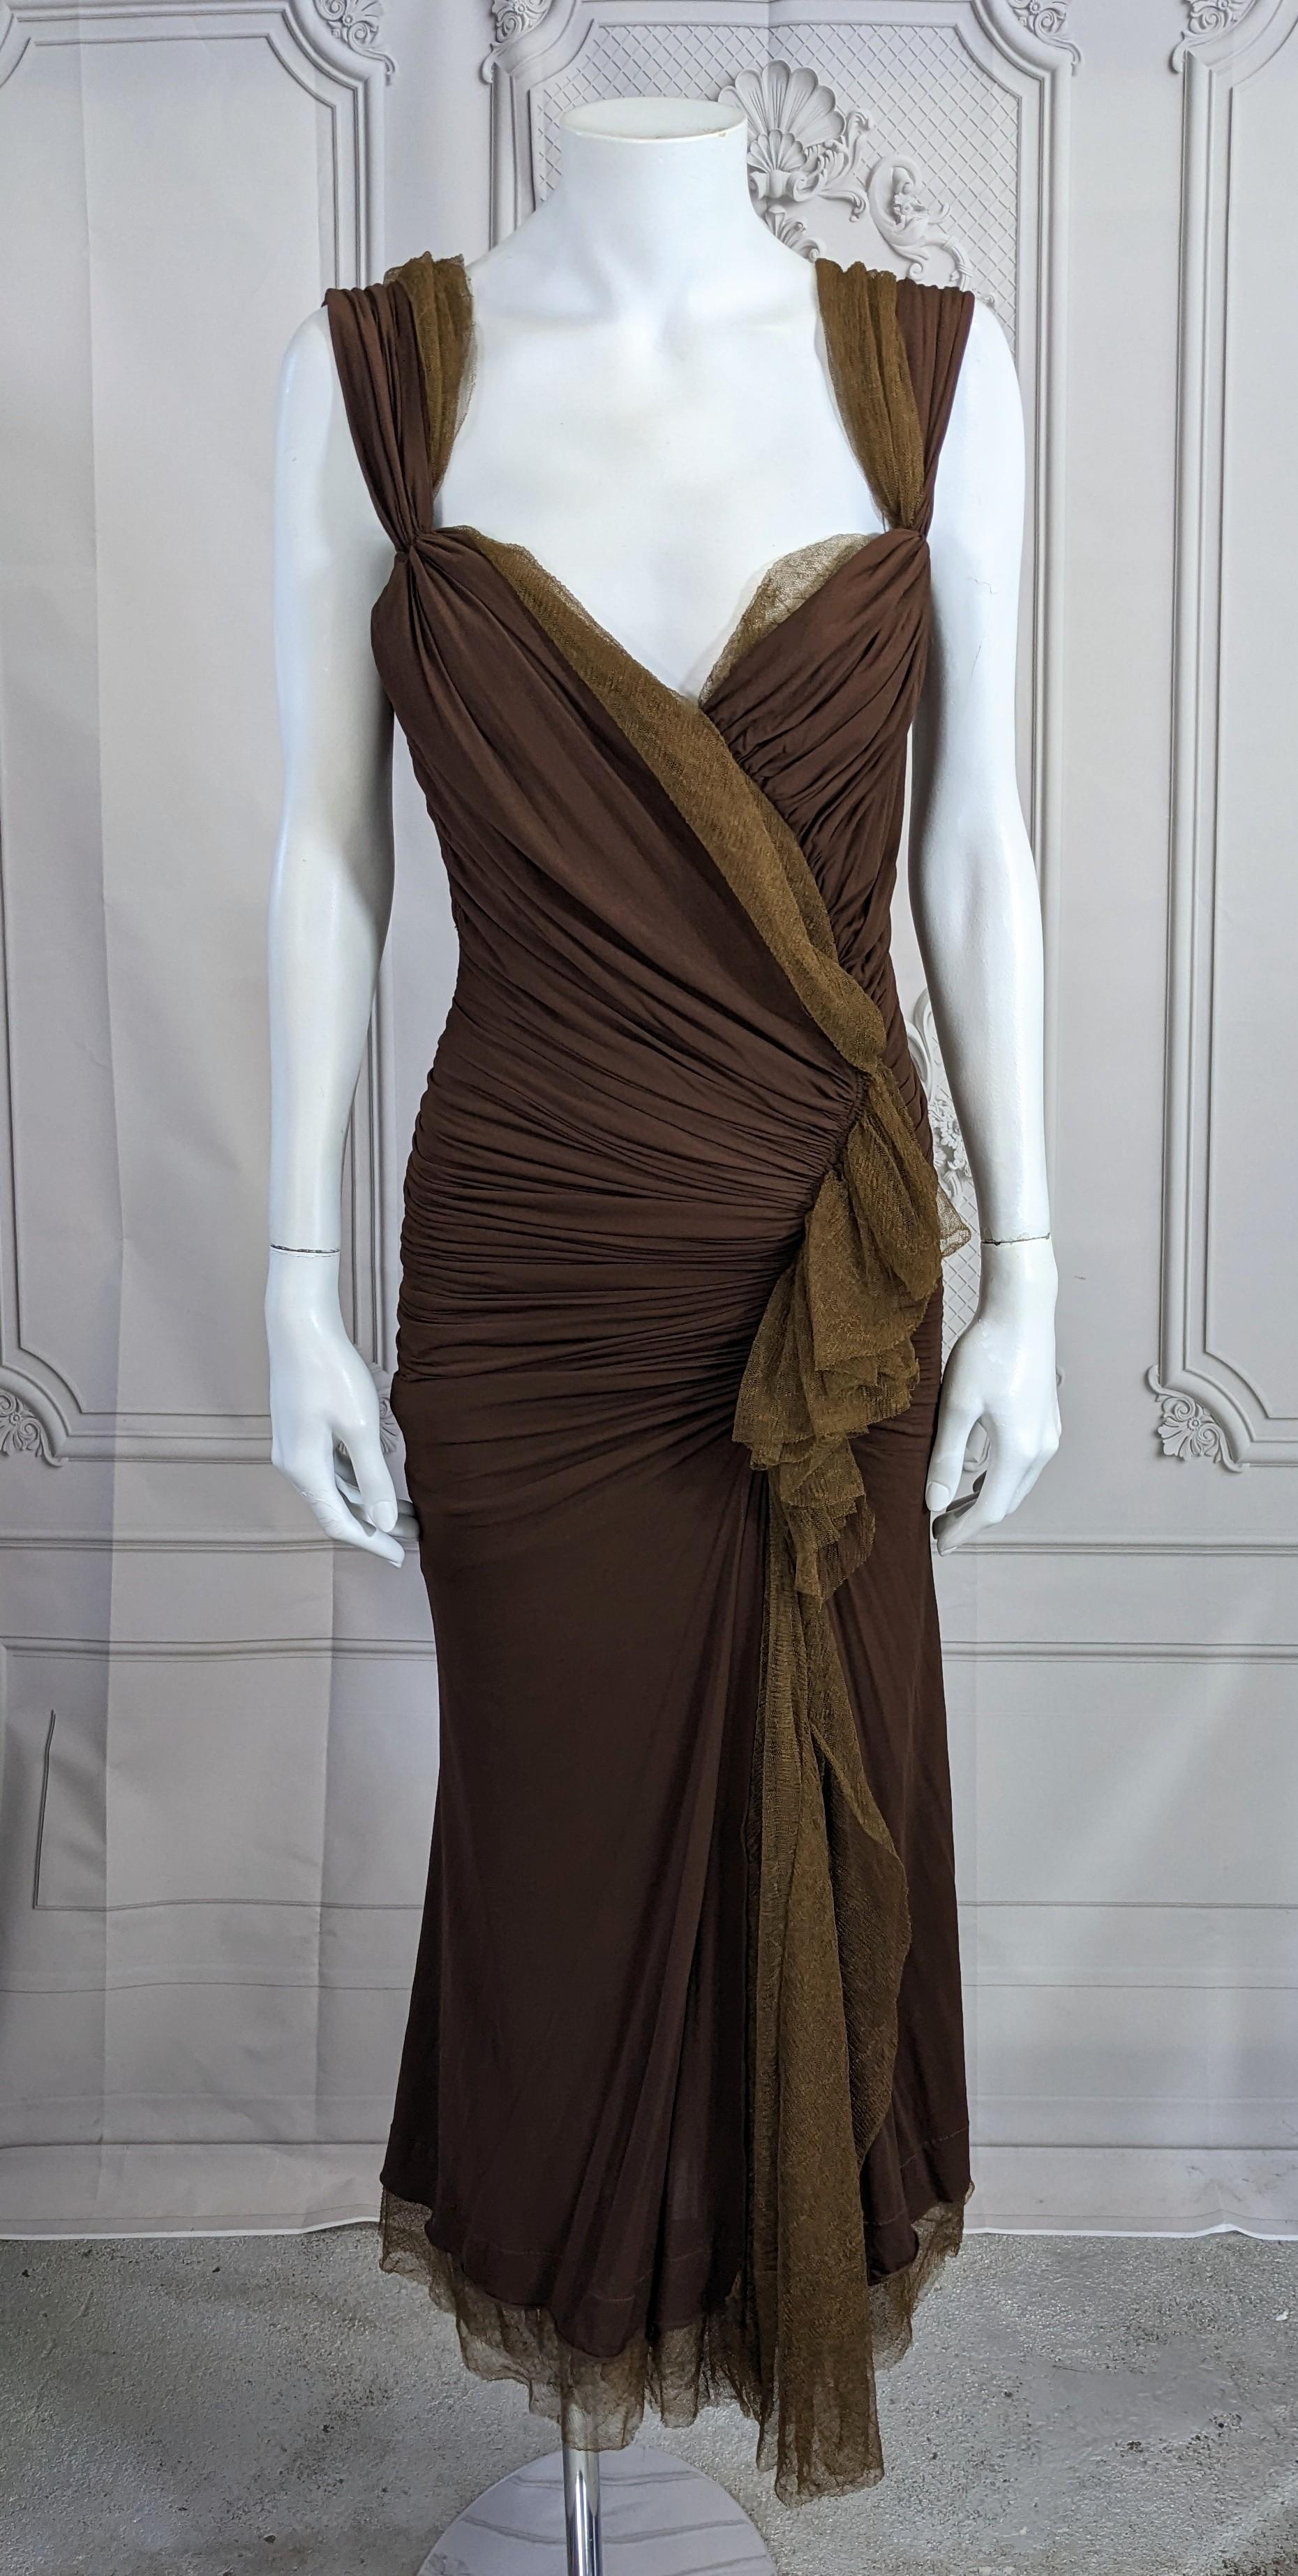 Donna Karan Collection's Sexy Draped Jersey Dress in deep chocolate stretch rayon jersey with greenish gold knit tulle cascade. Donna Karan gowns are seemingly simple in cut but are actually quite complicated.
The dress is lined in both the gold